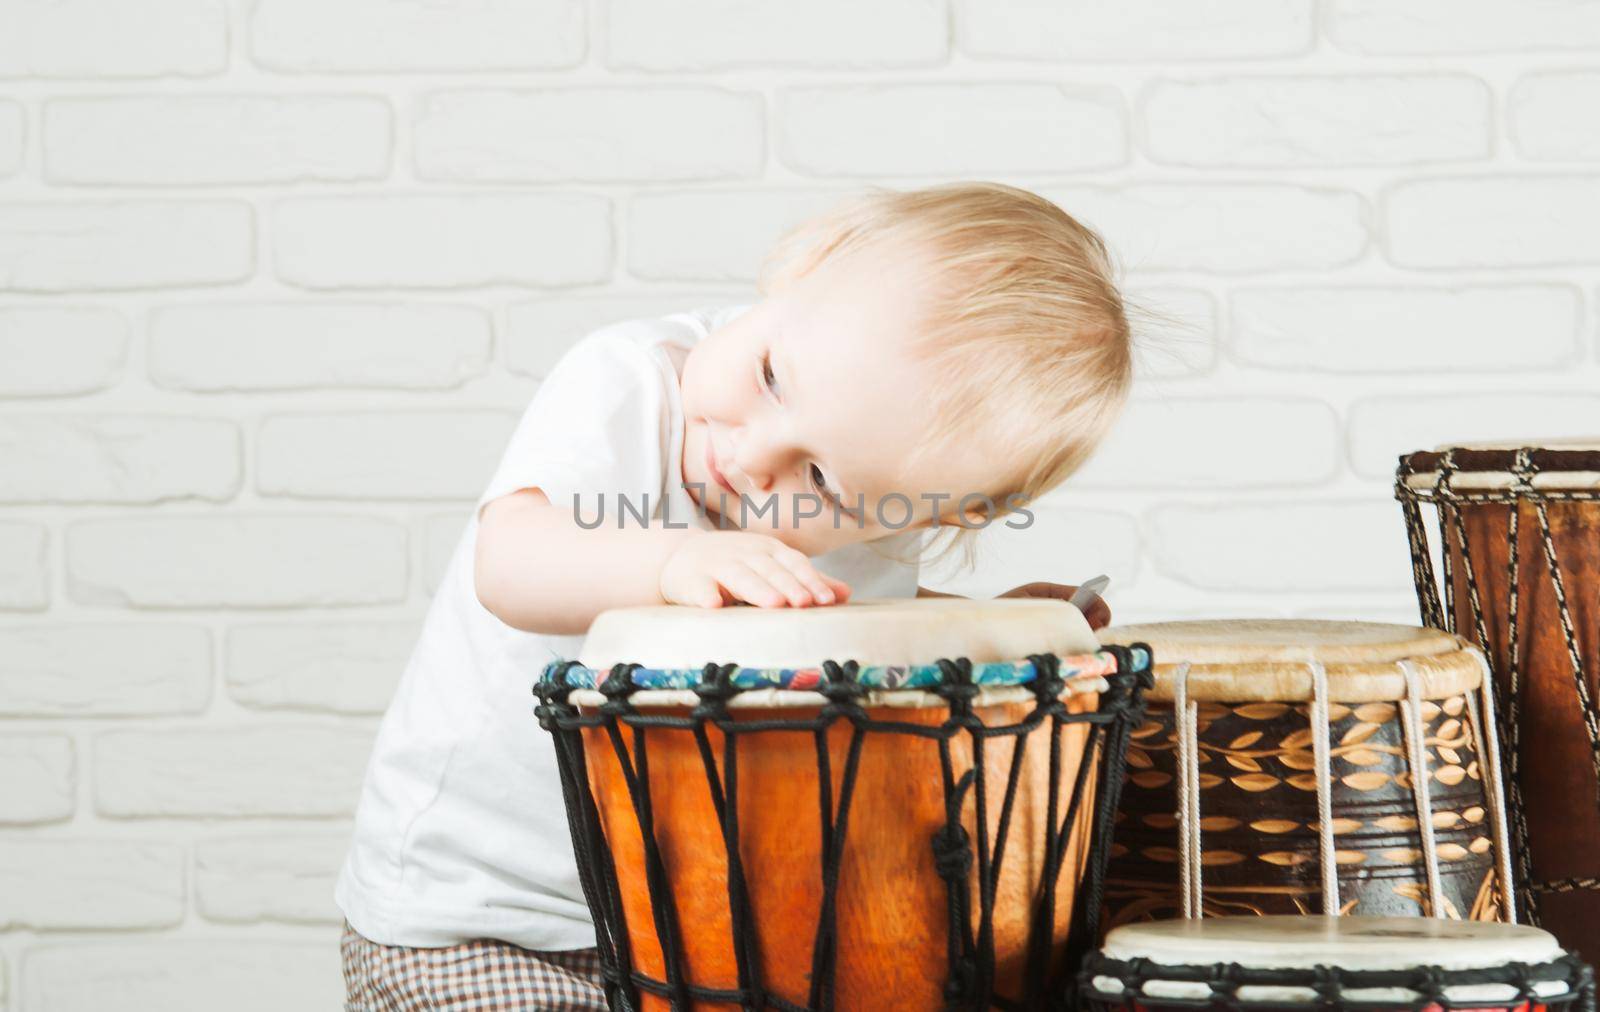 Cute baby playing drums by maramorosz